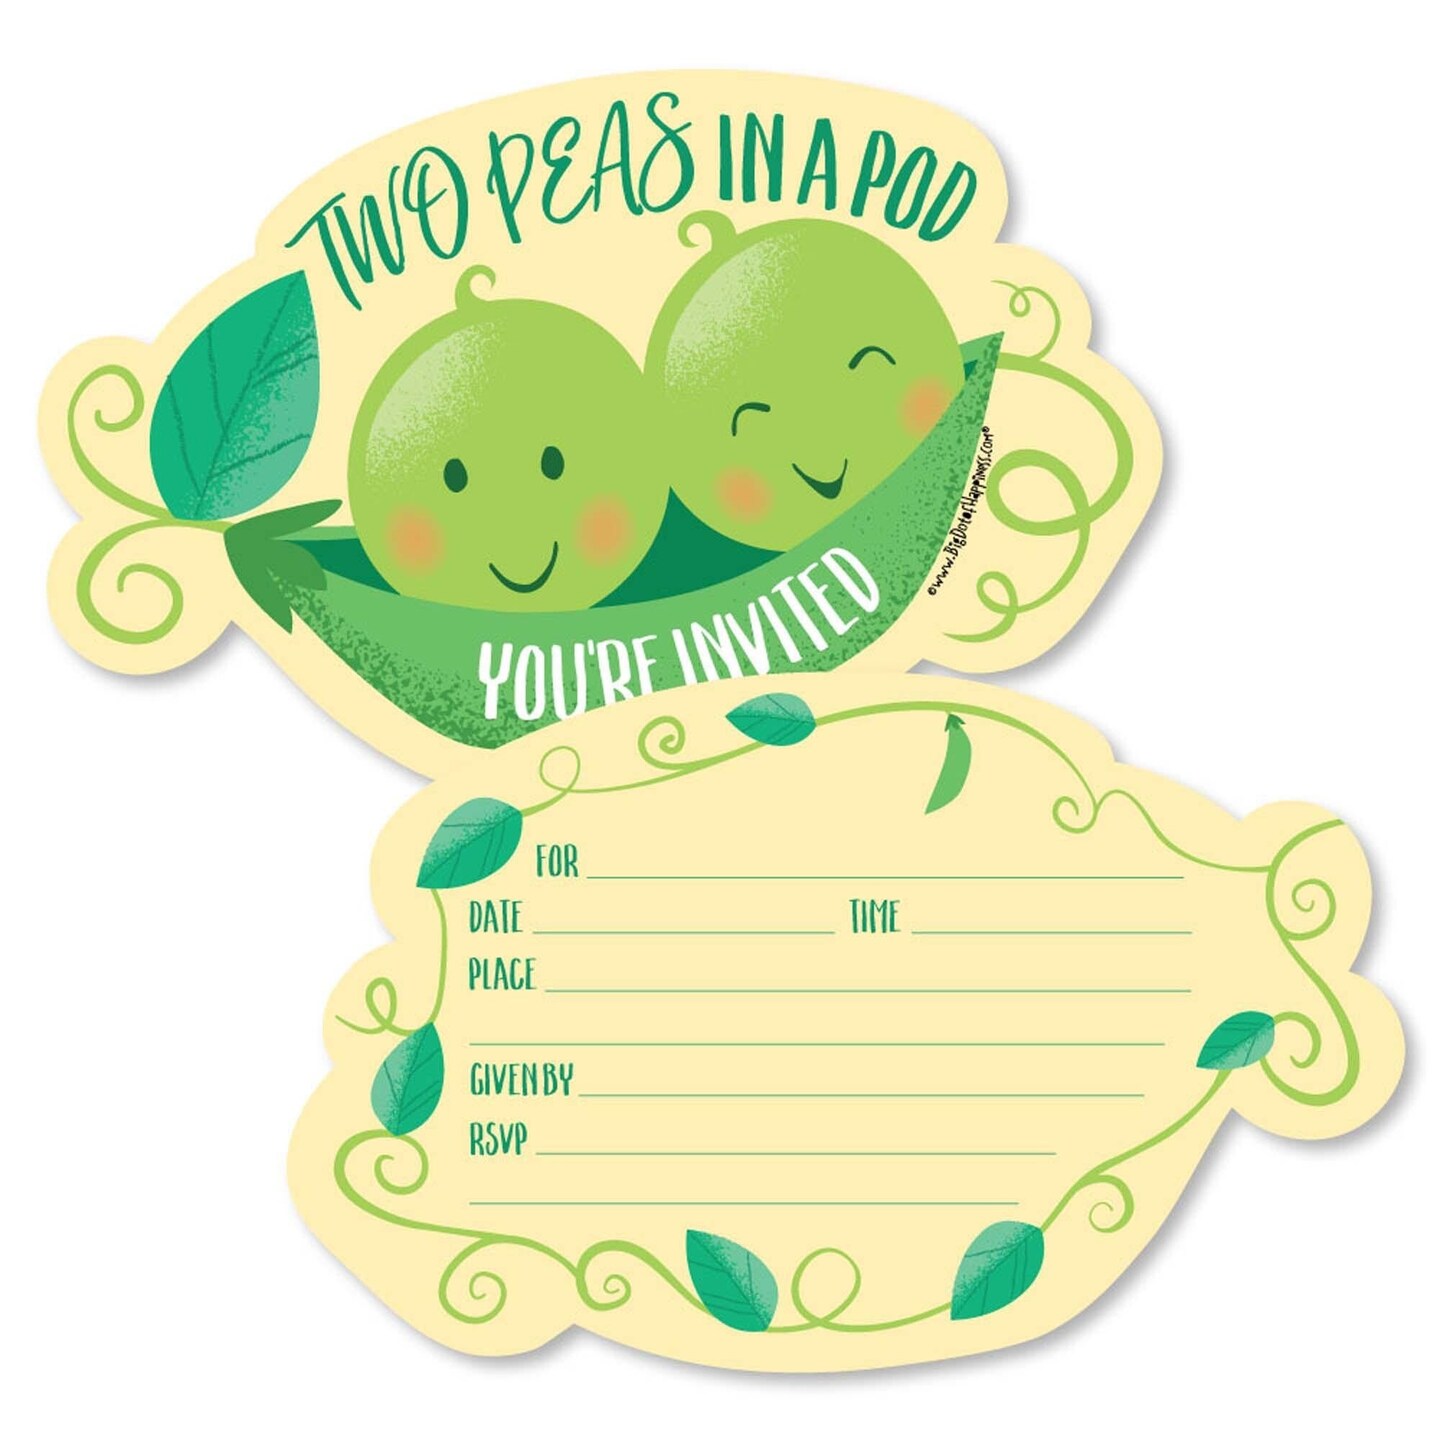 Big Dot of Happiness Double the Fun - Twins Two Peas in a Pod - Shaped Invites - Baby Shower or Birthday Party Invite Cards with Envelopes - Set of 12